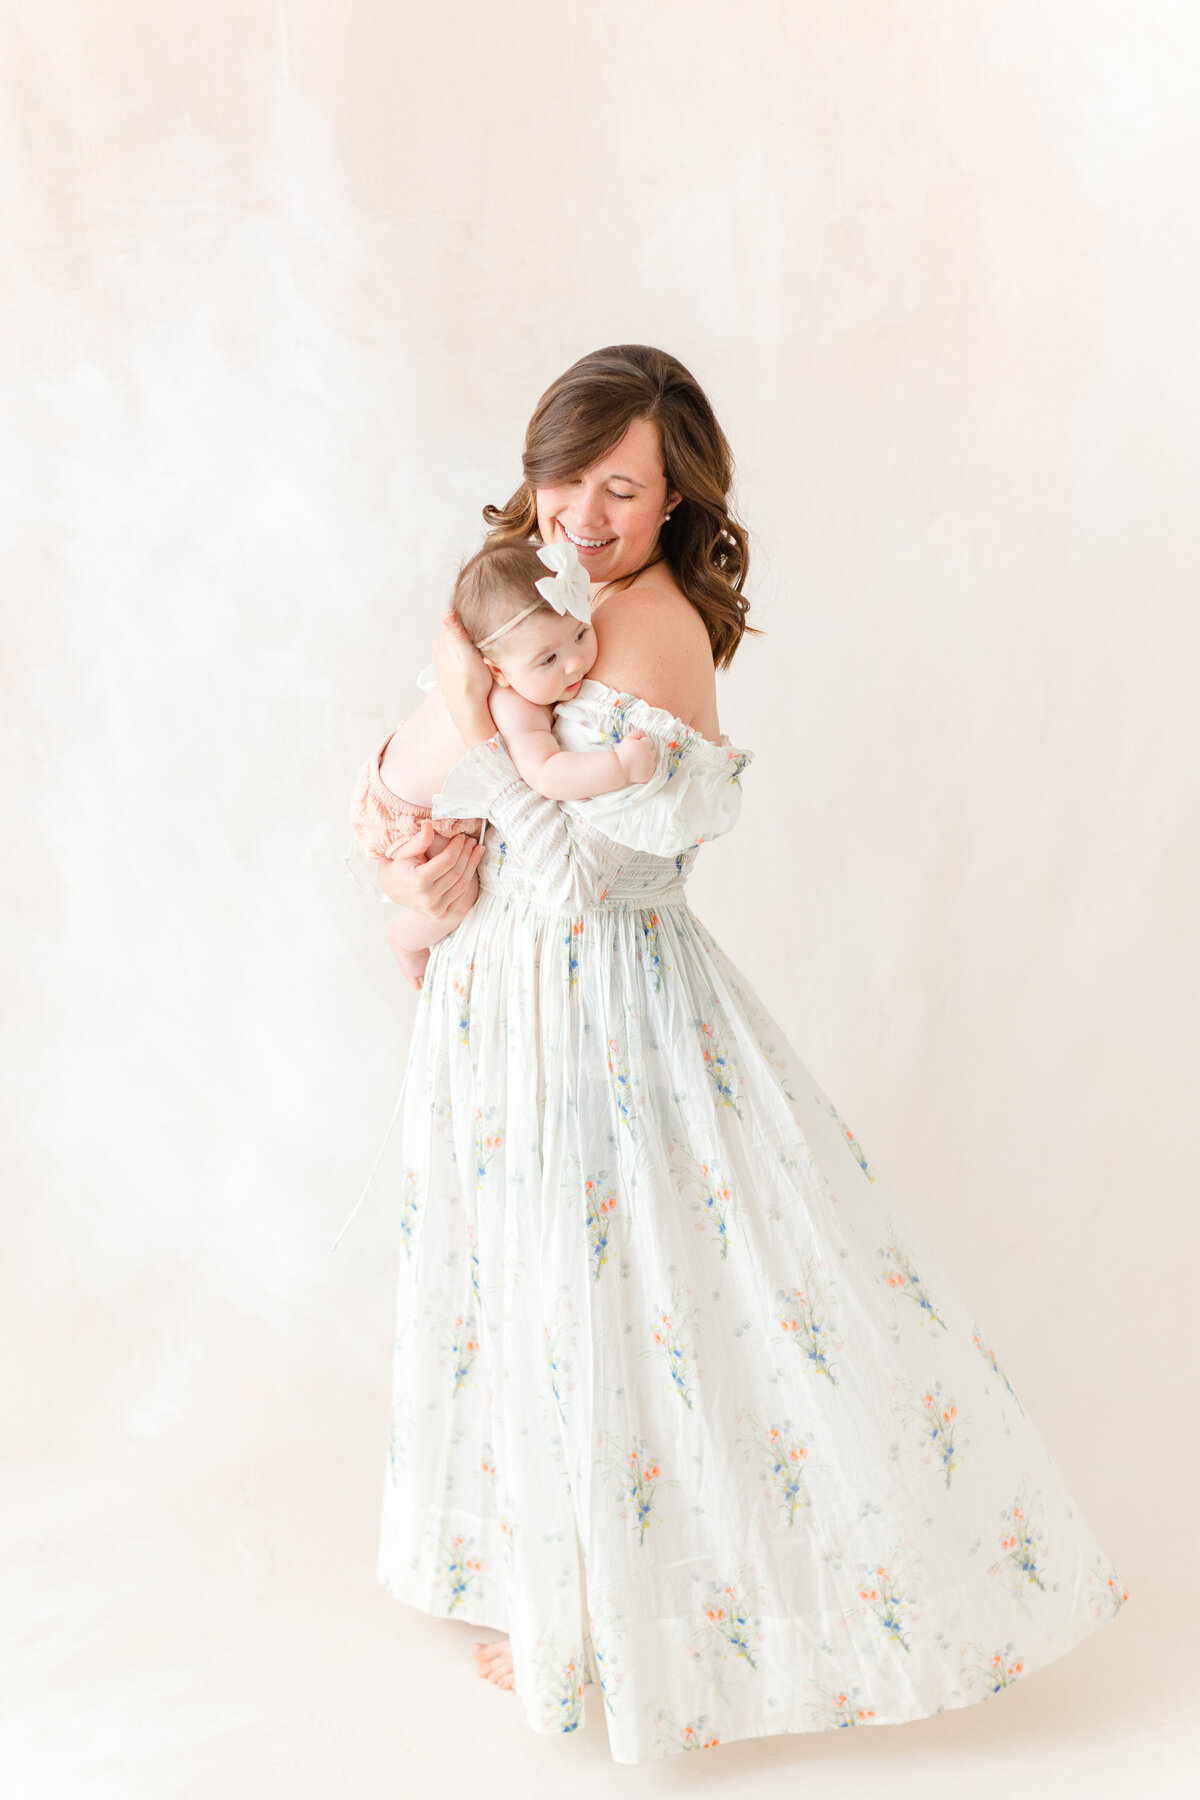 A mother spinning around smiling with her 6 month old baby girl wearing peach bloomers by at a Northern Virginia Family Photography photo session